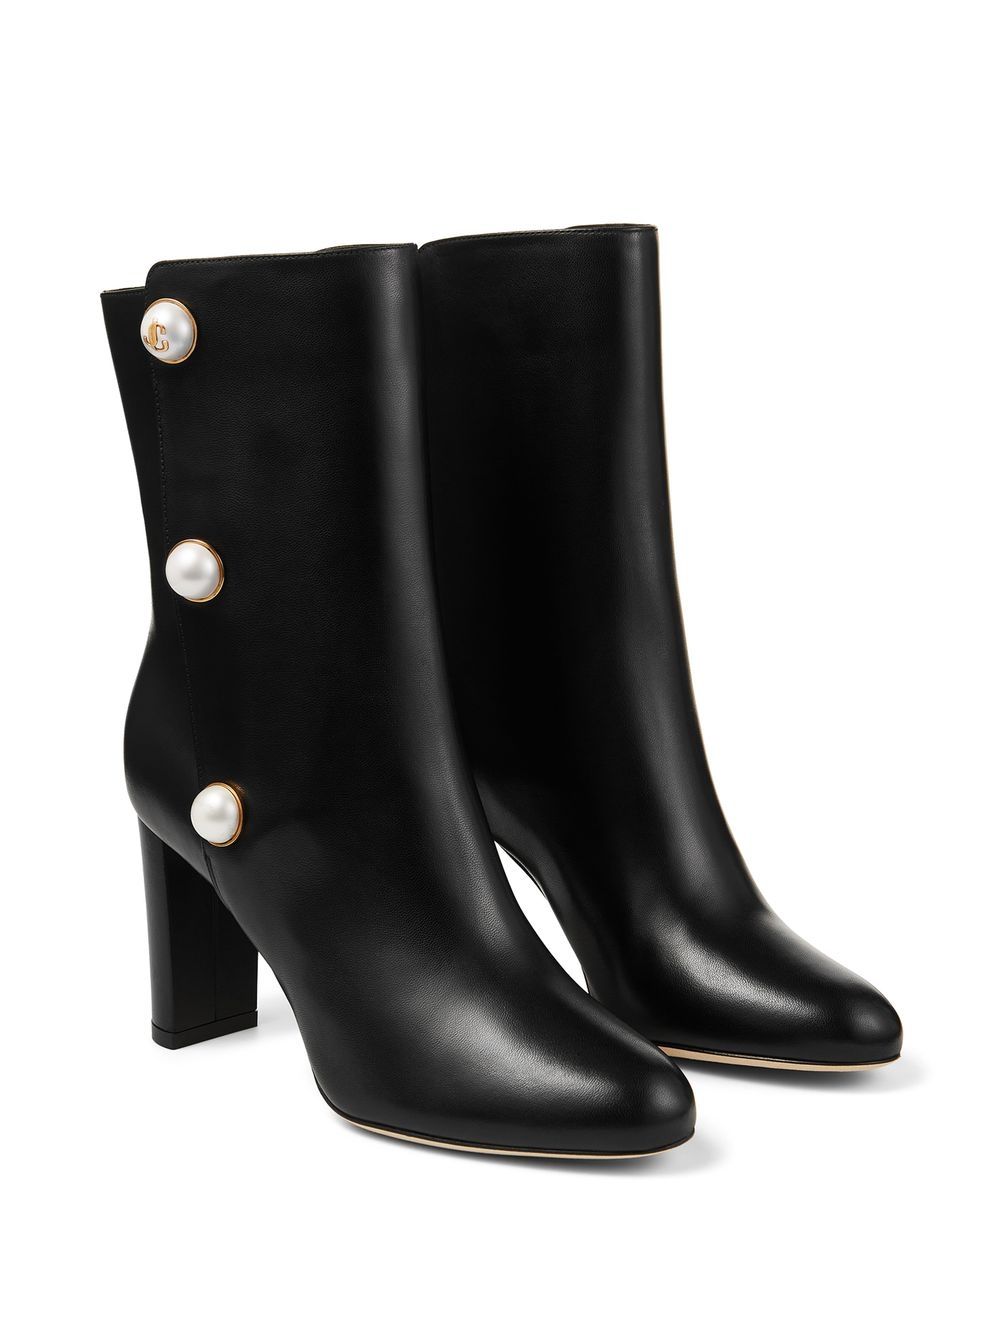 Image 2 of Jimmy Choo Rina 85mm ankle boots